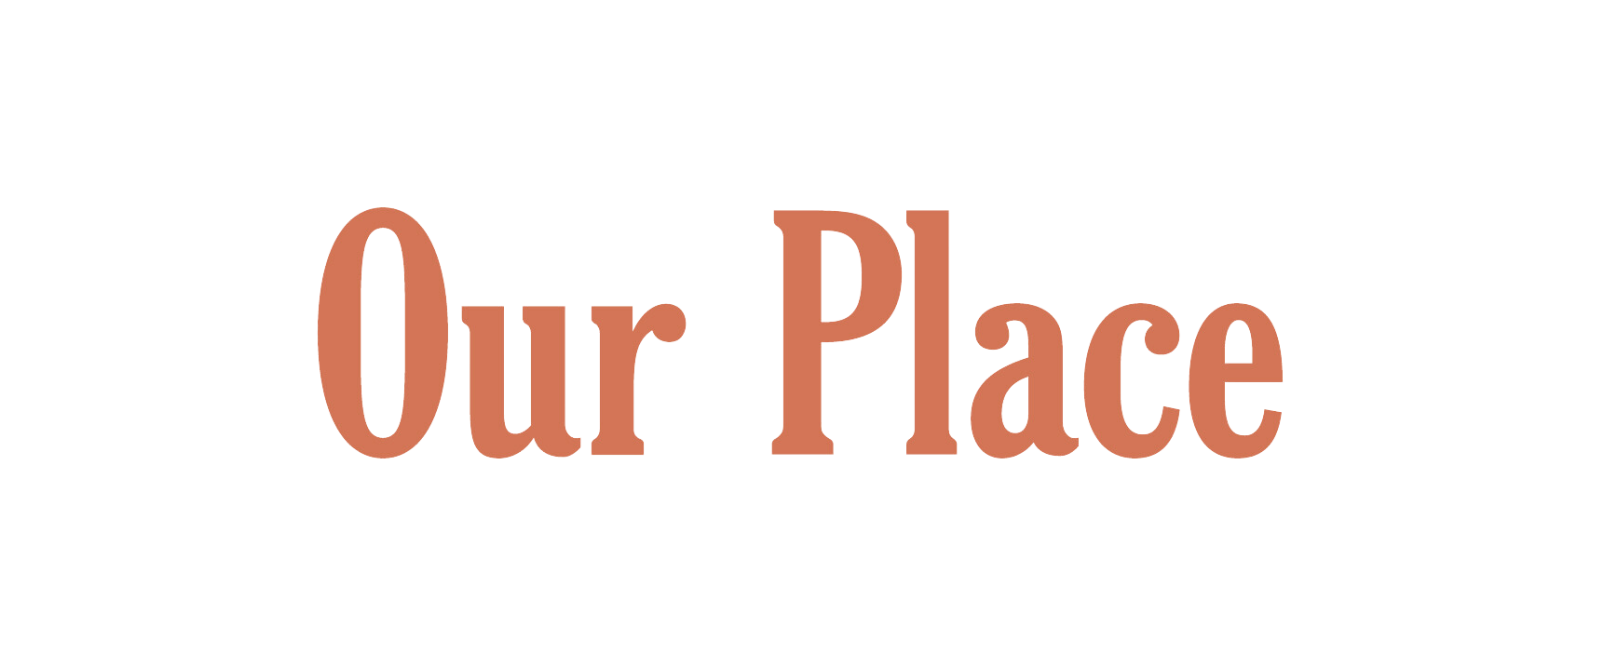 our place-2.png